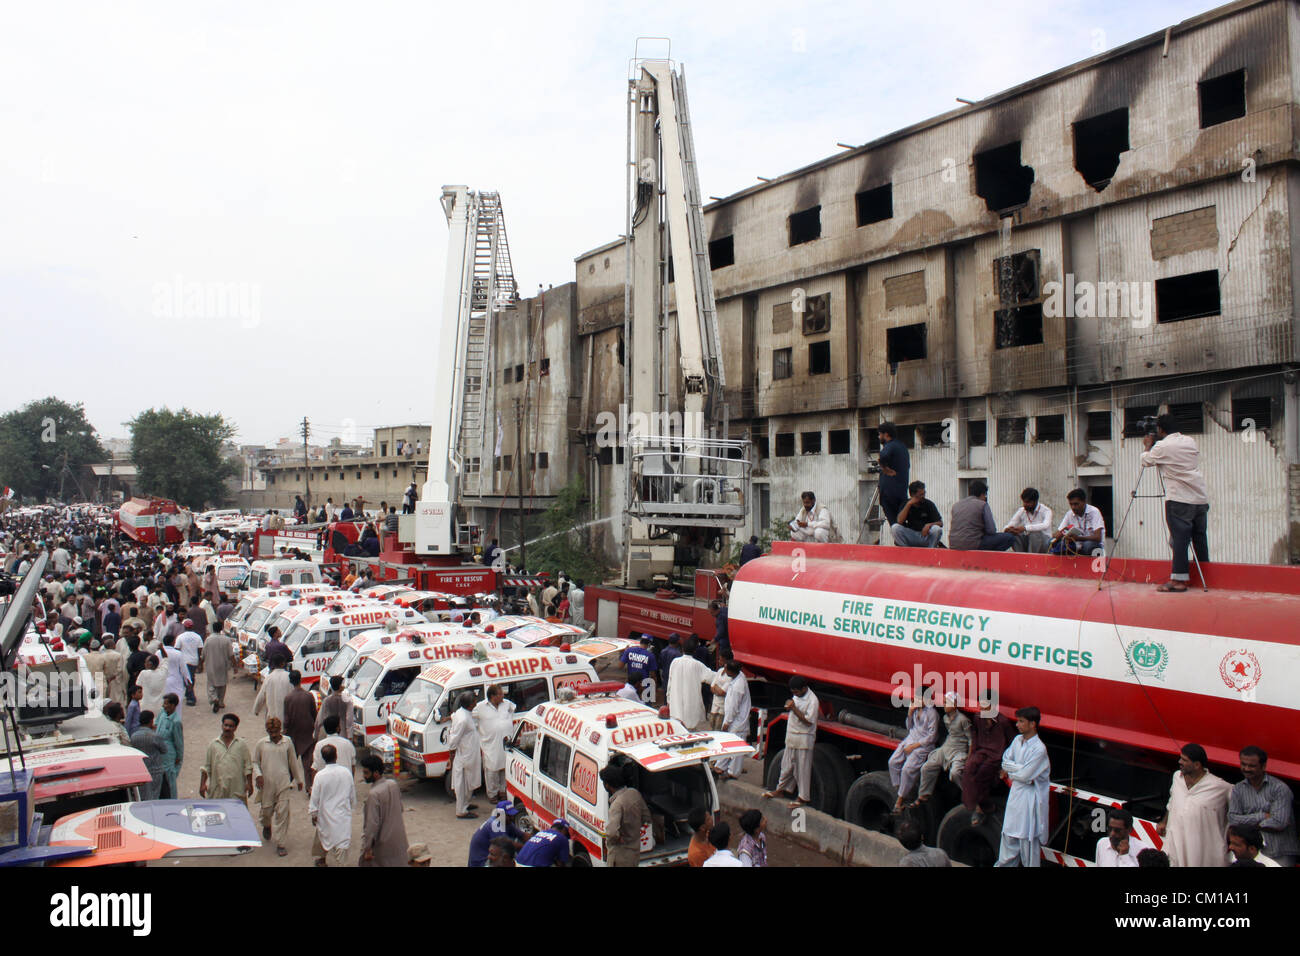 Karachi, Pakistan. 12th September, 2012. Rescue workers carry out rescue work at the site of burnt garment factory in Karachi September 12, 2012. Atleast 289 workers were burnt when fire engulfed a garment factory in Karachi. Stock Photo